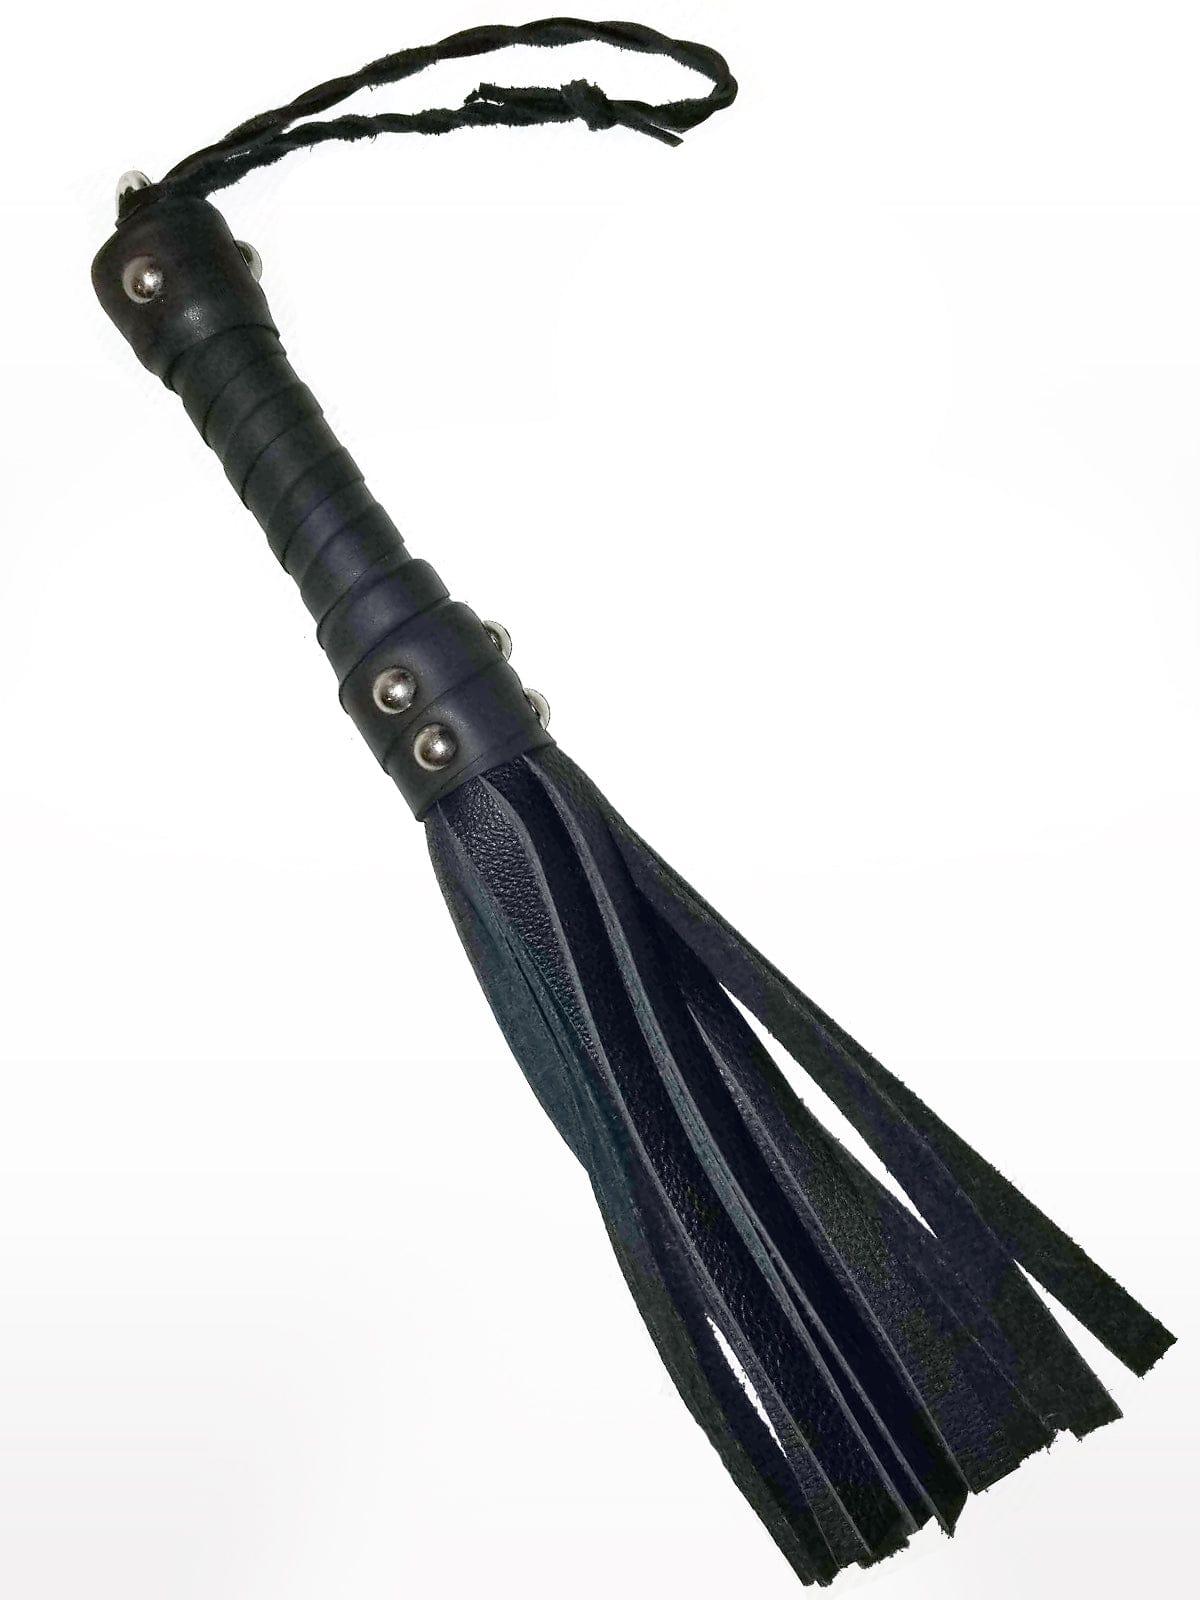 SMALL COWHIDE HANDY SIZE FLOGGER - FullKit.com